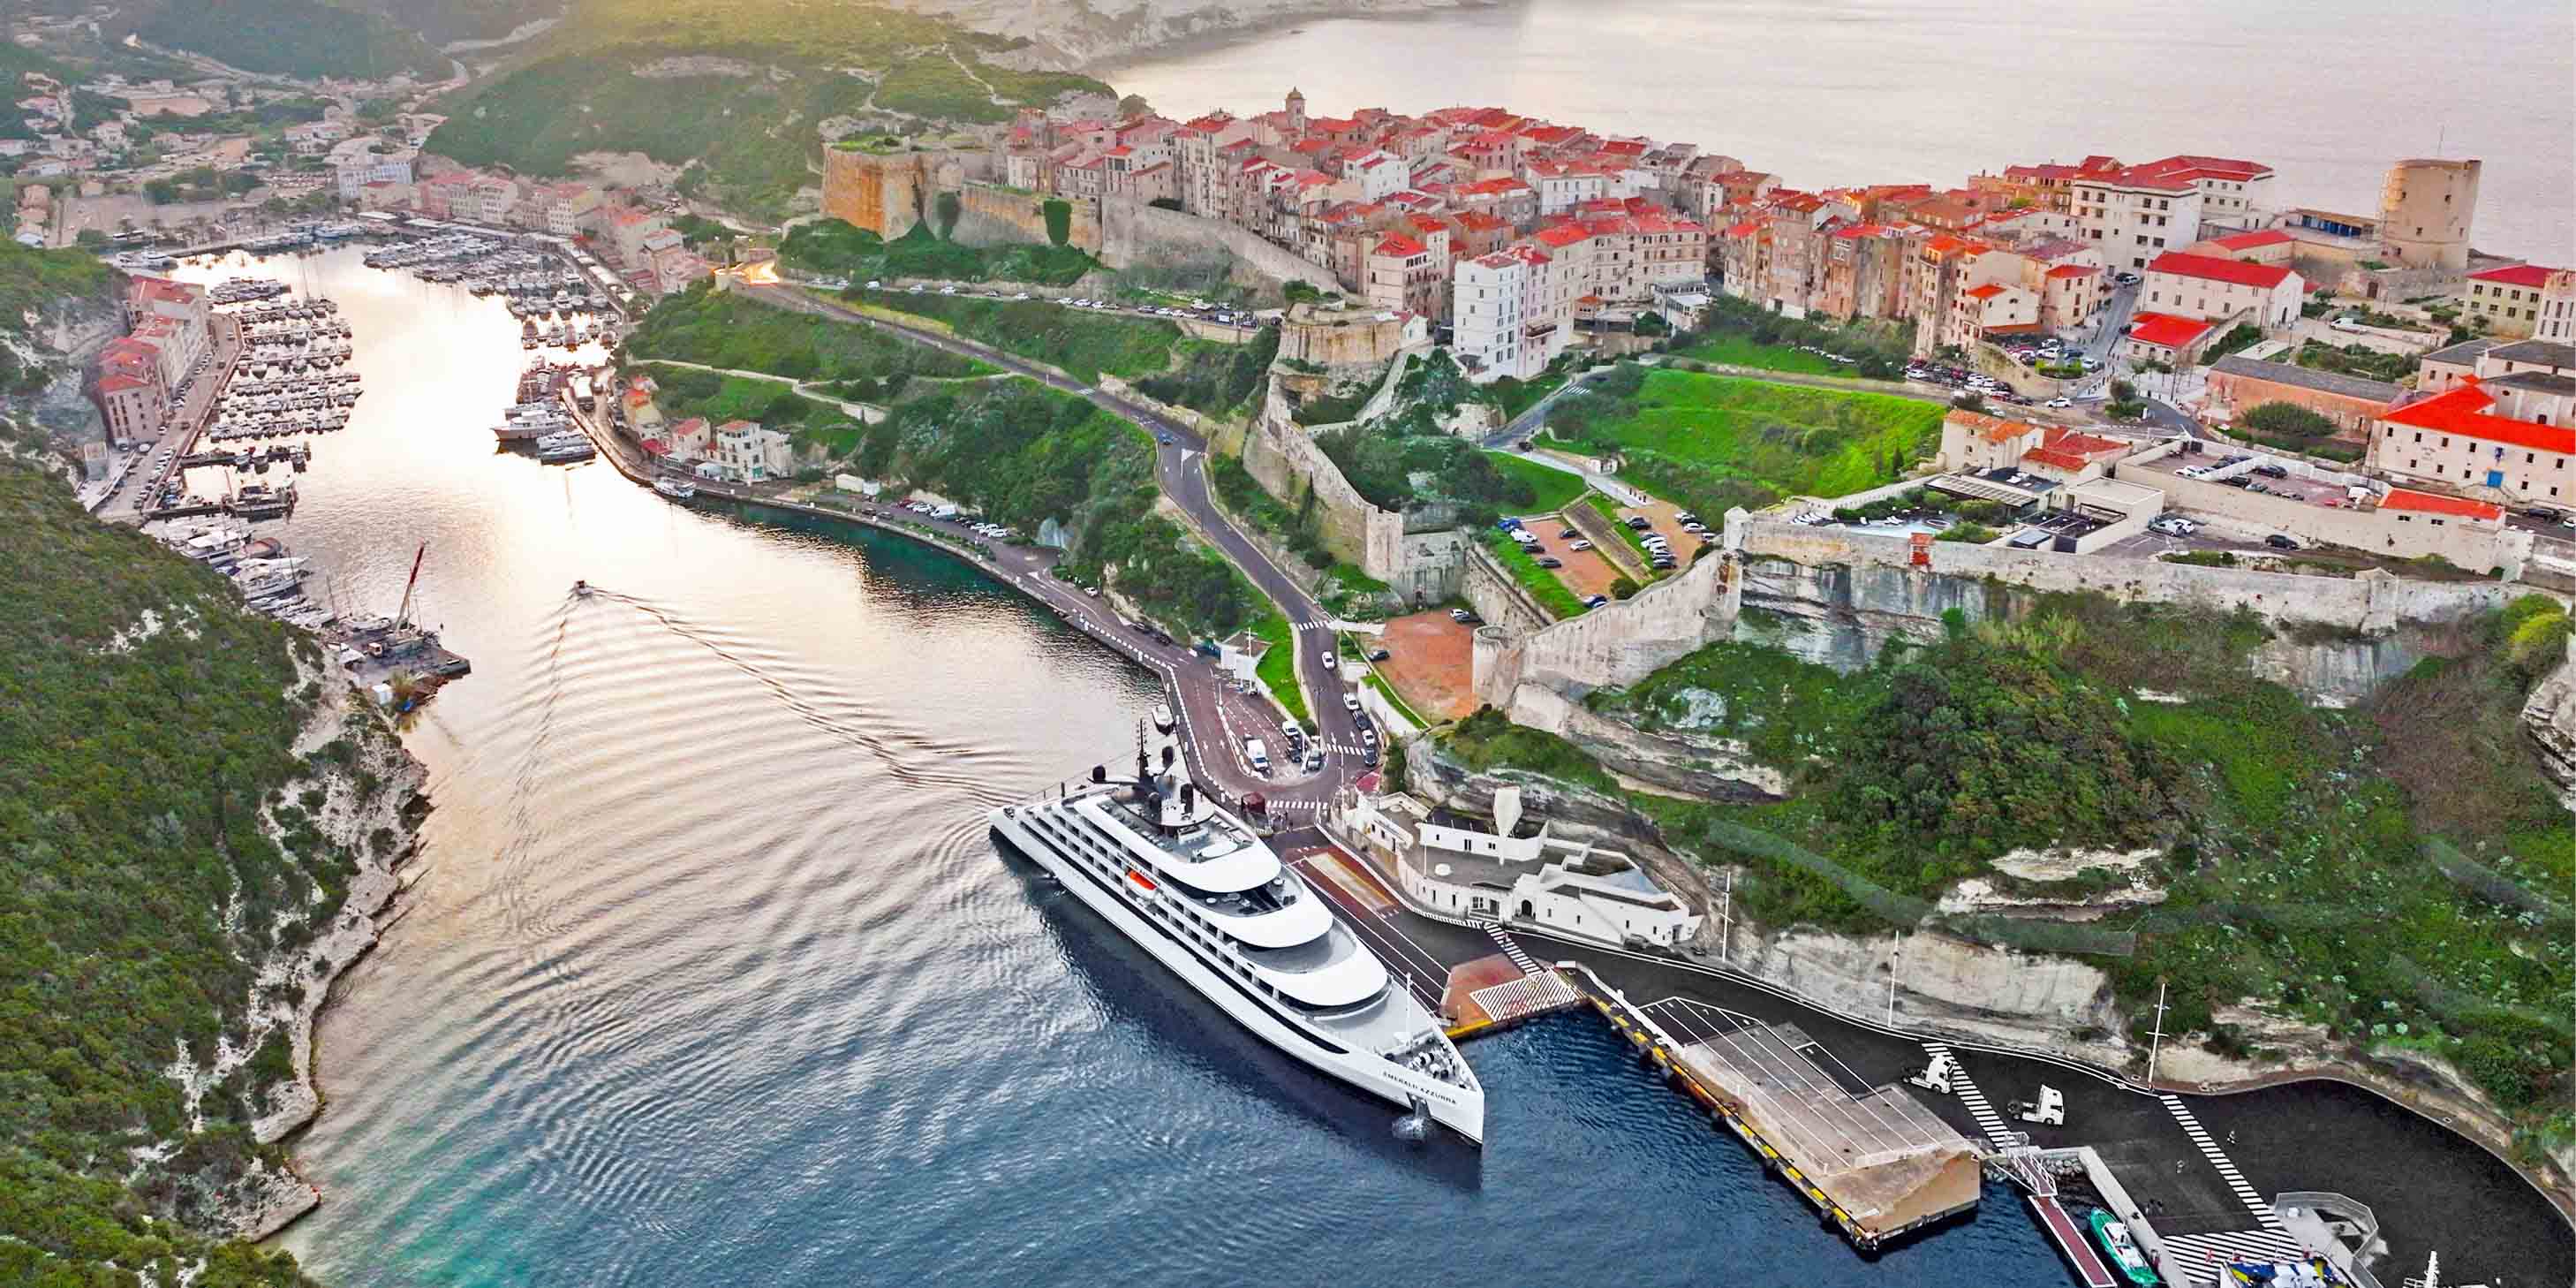 An Emerald Cruises yacht is docked in the heart of Bonifacio, Corsica, with terracotta roofs seen in the background.